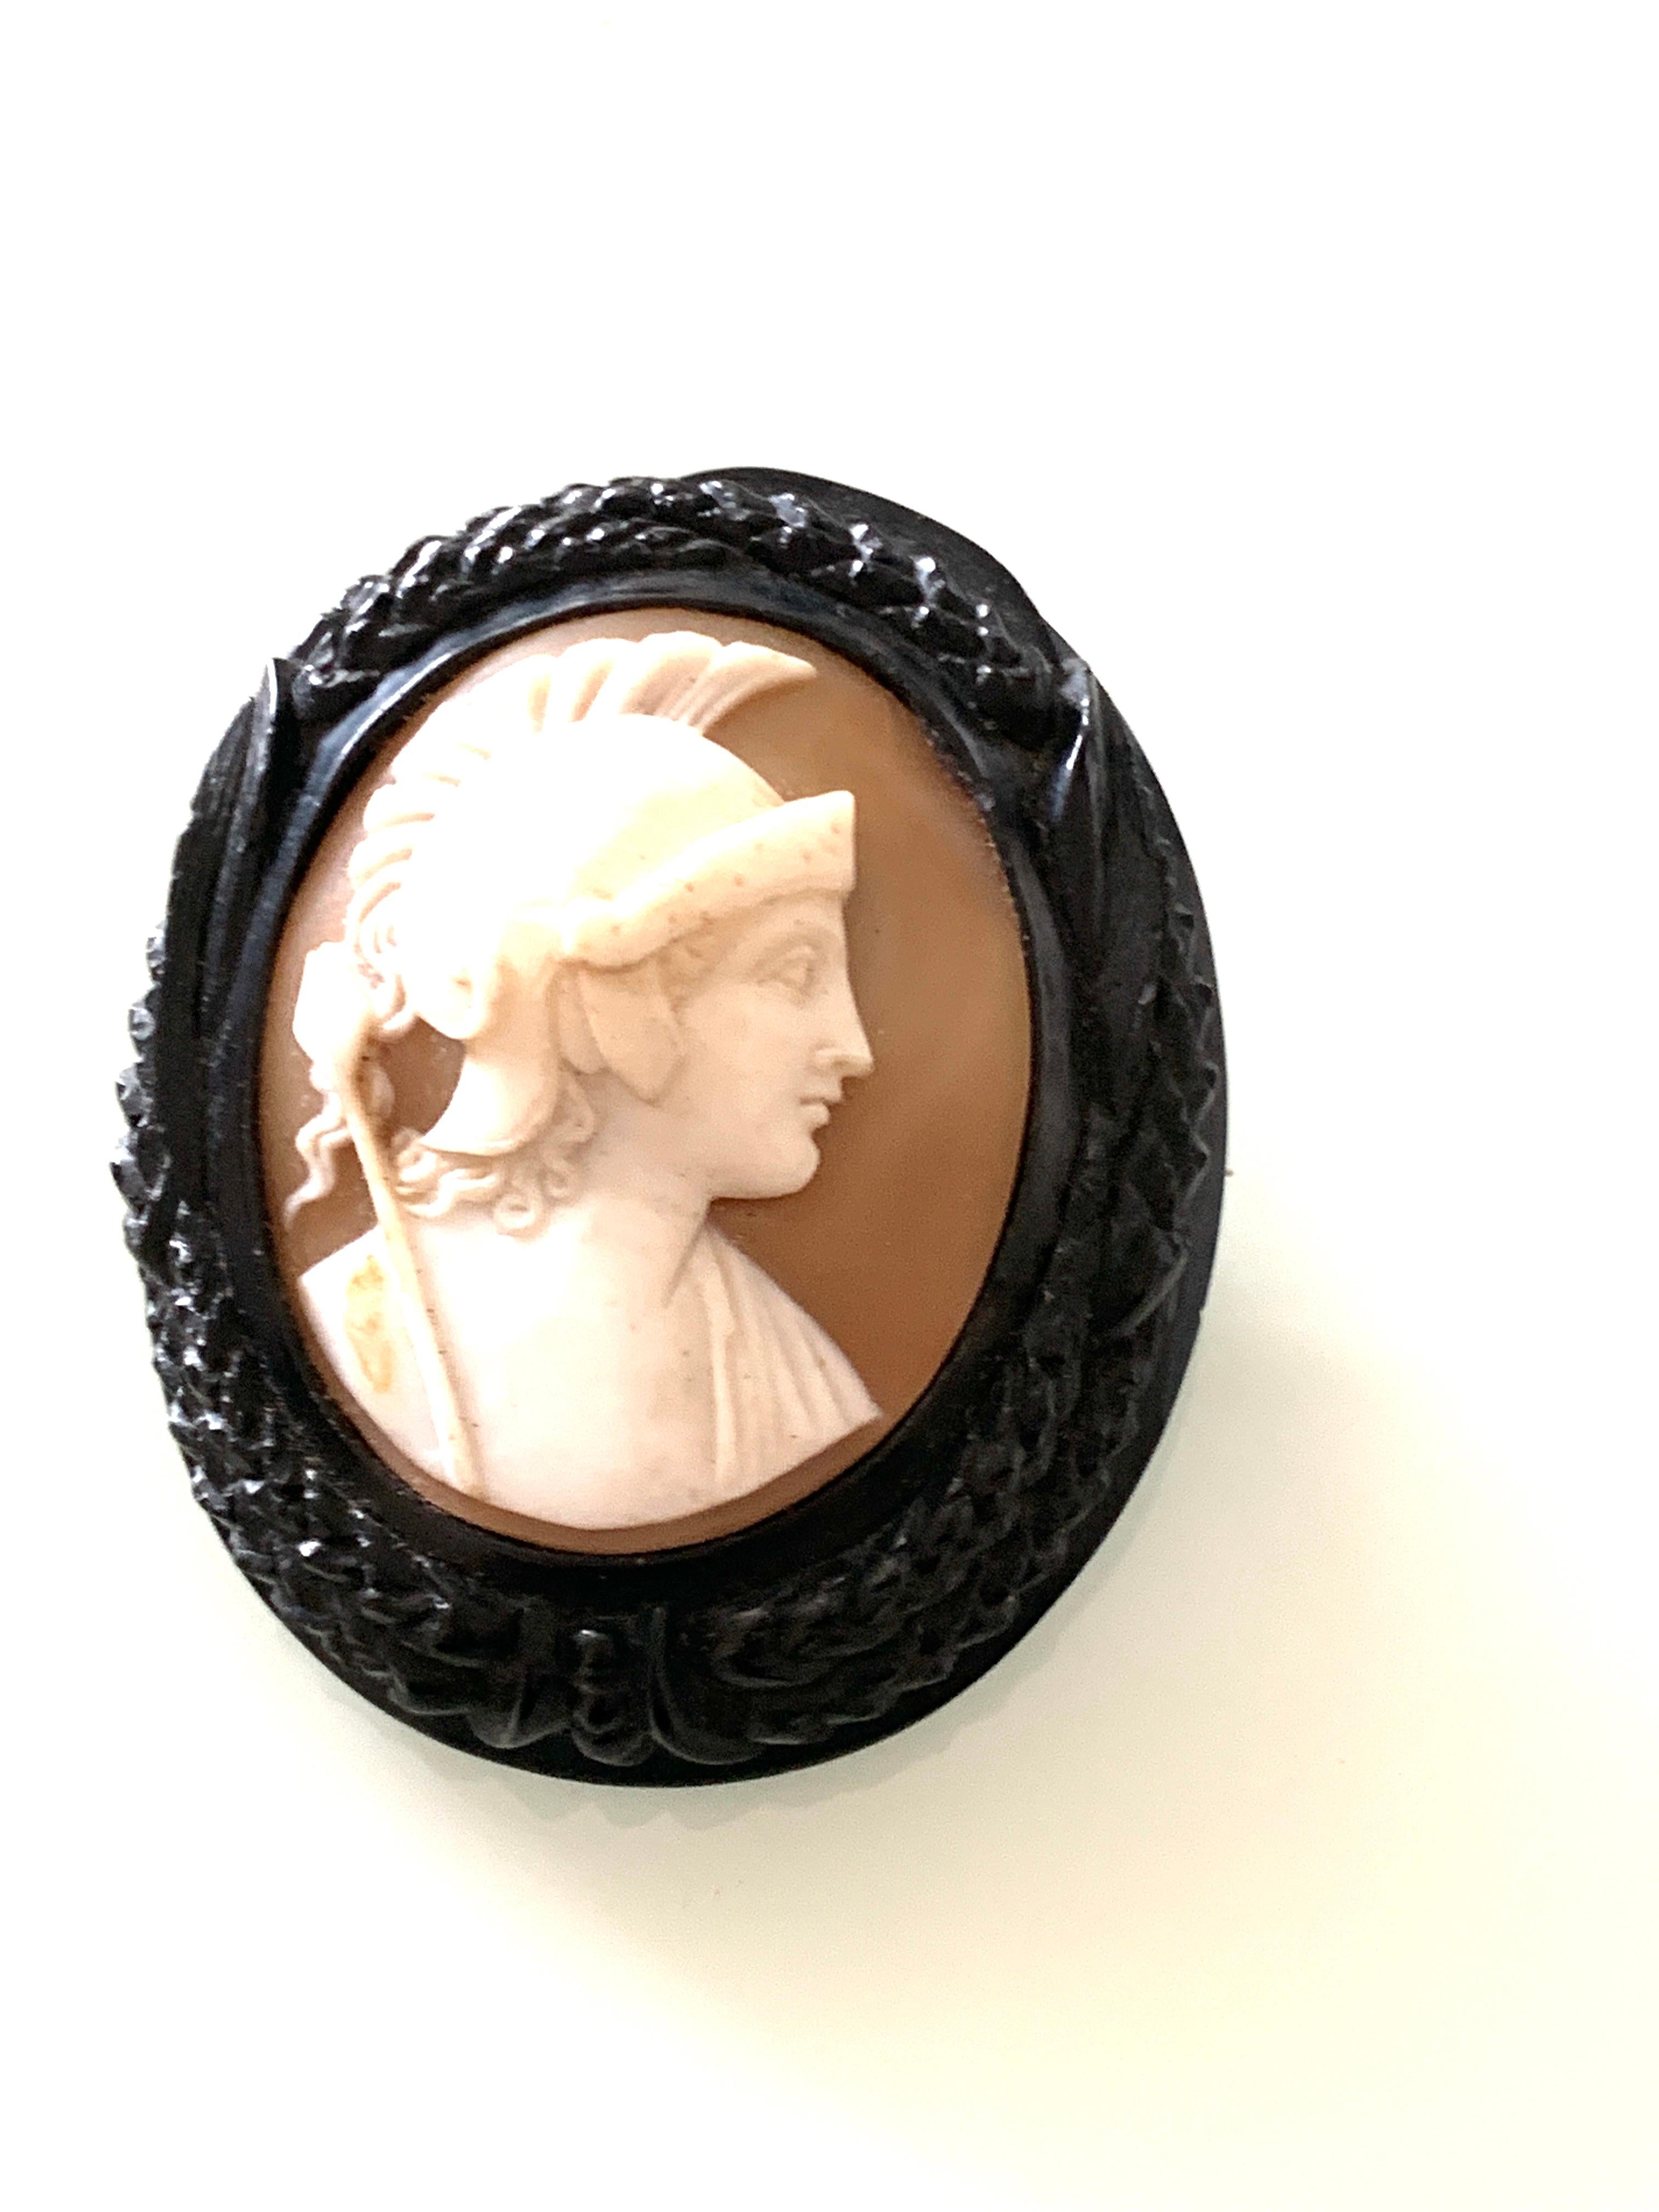 Very Large
Antique Victorian Mourning brooch
made from Black Whitby Jet and Cameo Shell 
depicting a soldier
Pin is secure
edging is in very good condition
( no damage )
Size 5cm x 4 cm 
Weighs 23.78 grams